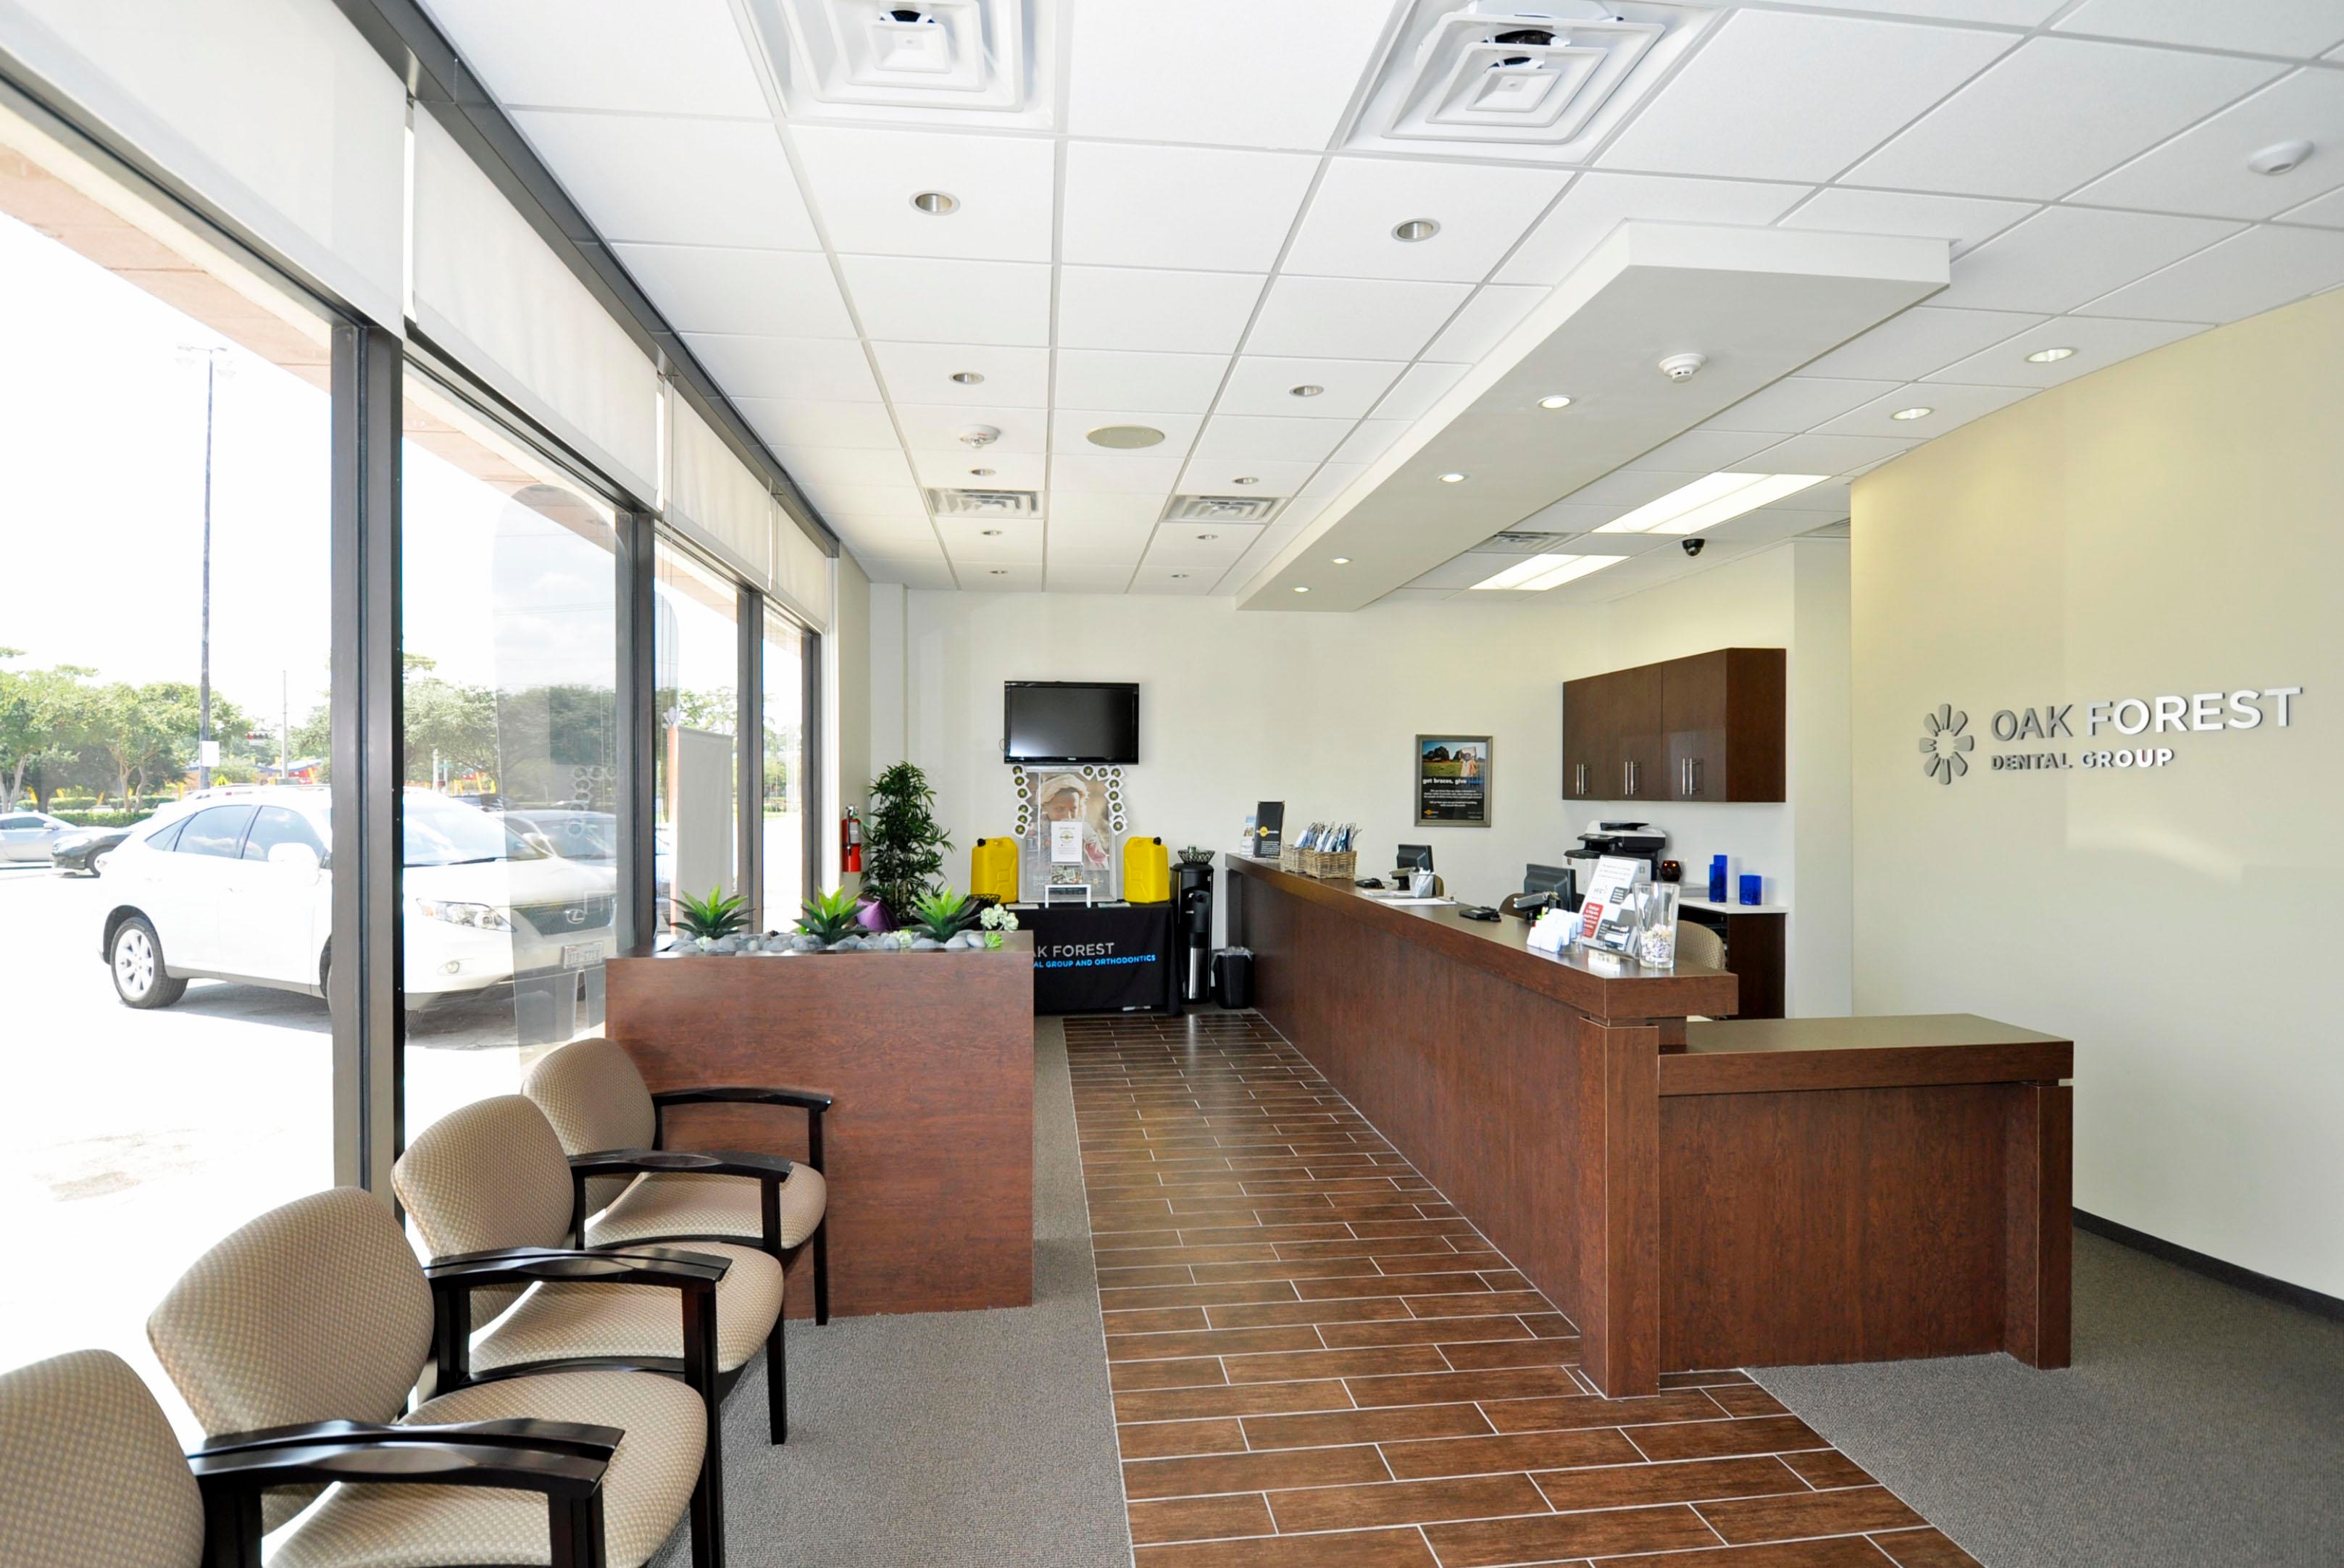 Oak Forest Dental Group and Orthodontics opened its doors to the Houston community in December 2012.